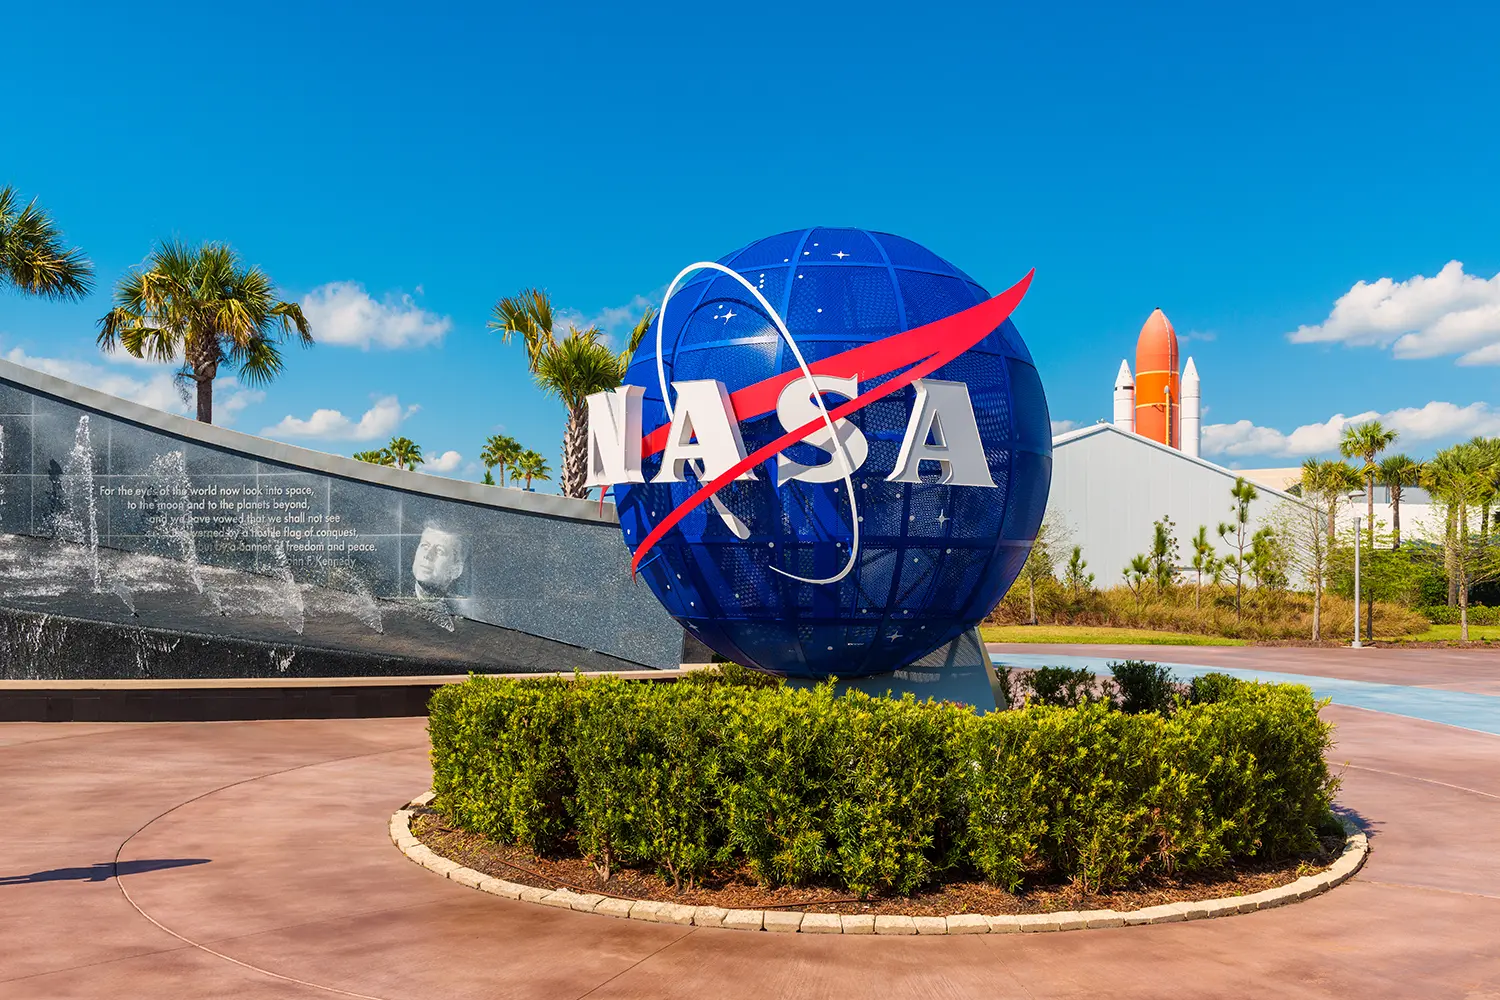 NASA Logo on Globe at Kennedy Space Center Visitor Complex in Cape Canaveral, Florida, USA